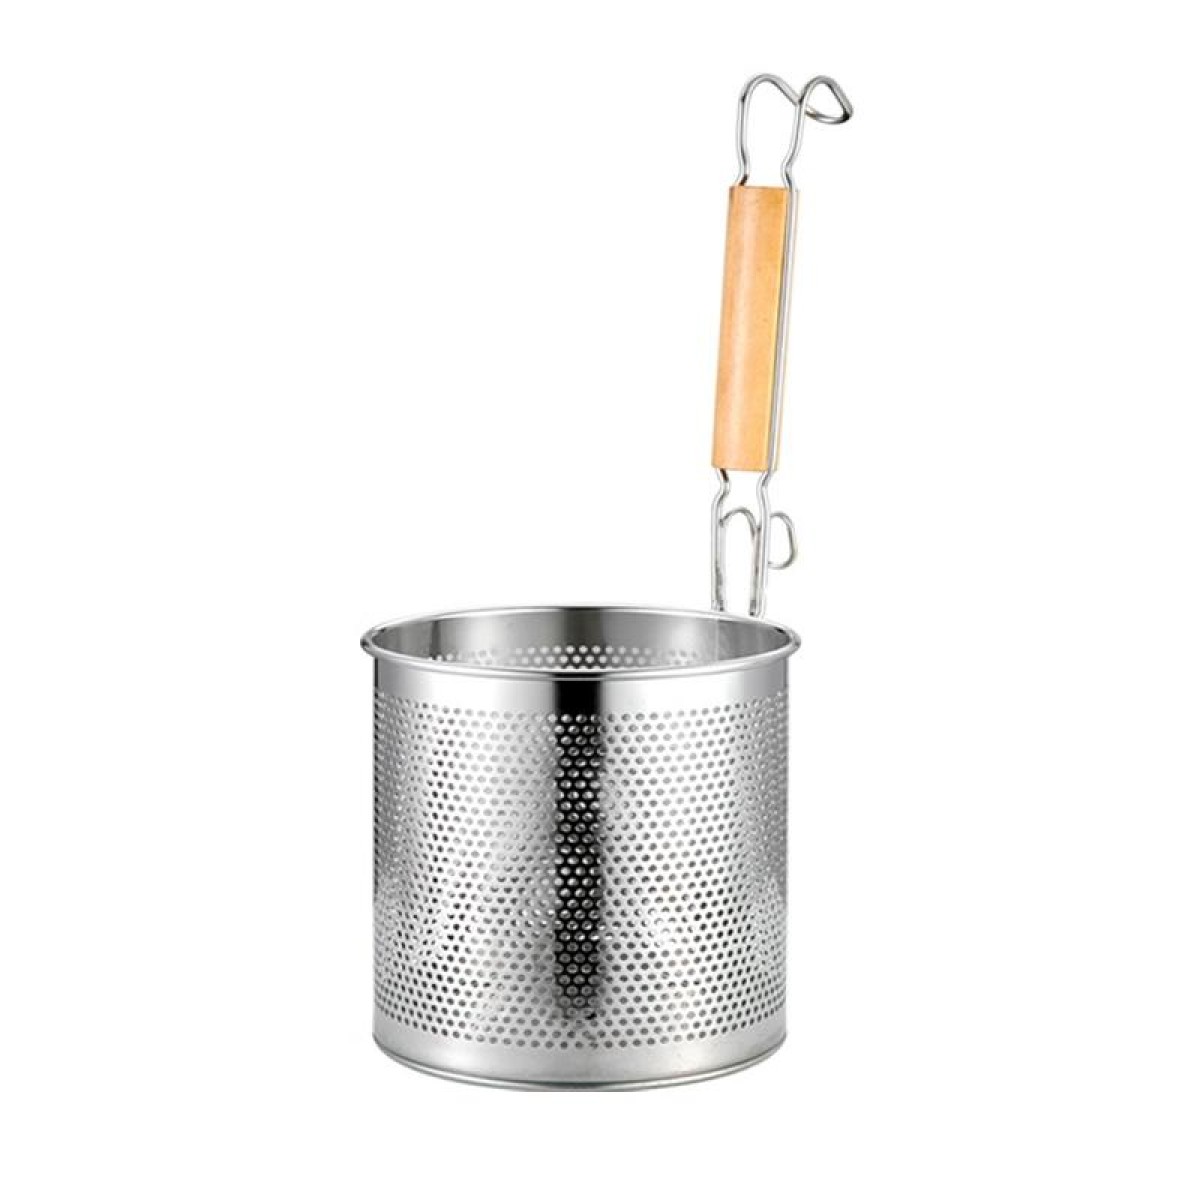 Household Stainless Steel Wooden Handle Spoon Kitchen Filtering Powder Oil Leakage Frying Basket, Model: 18cm Round Handle